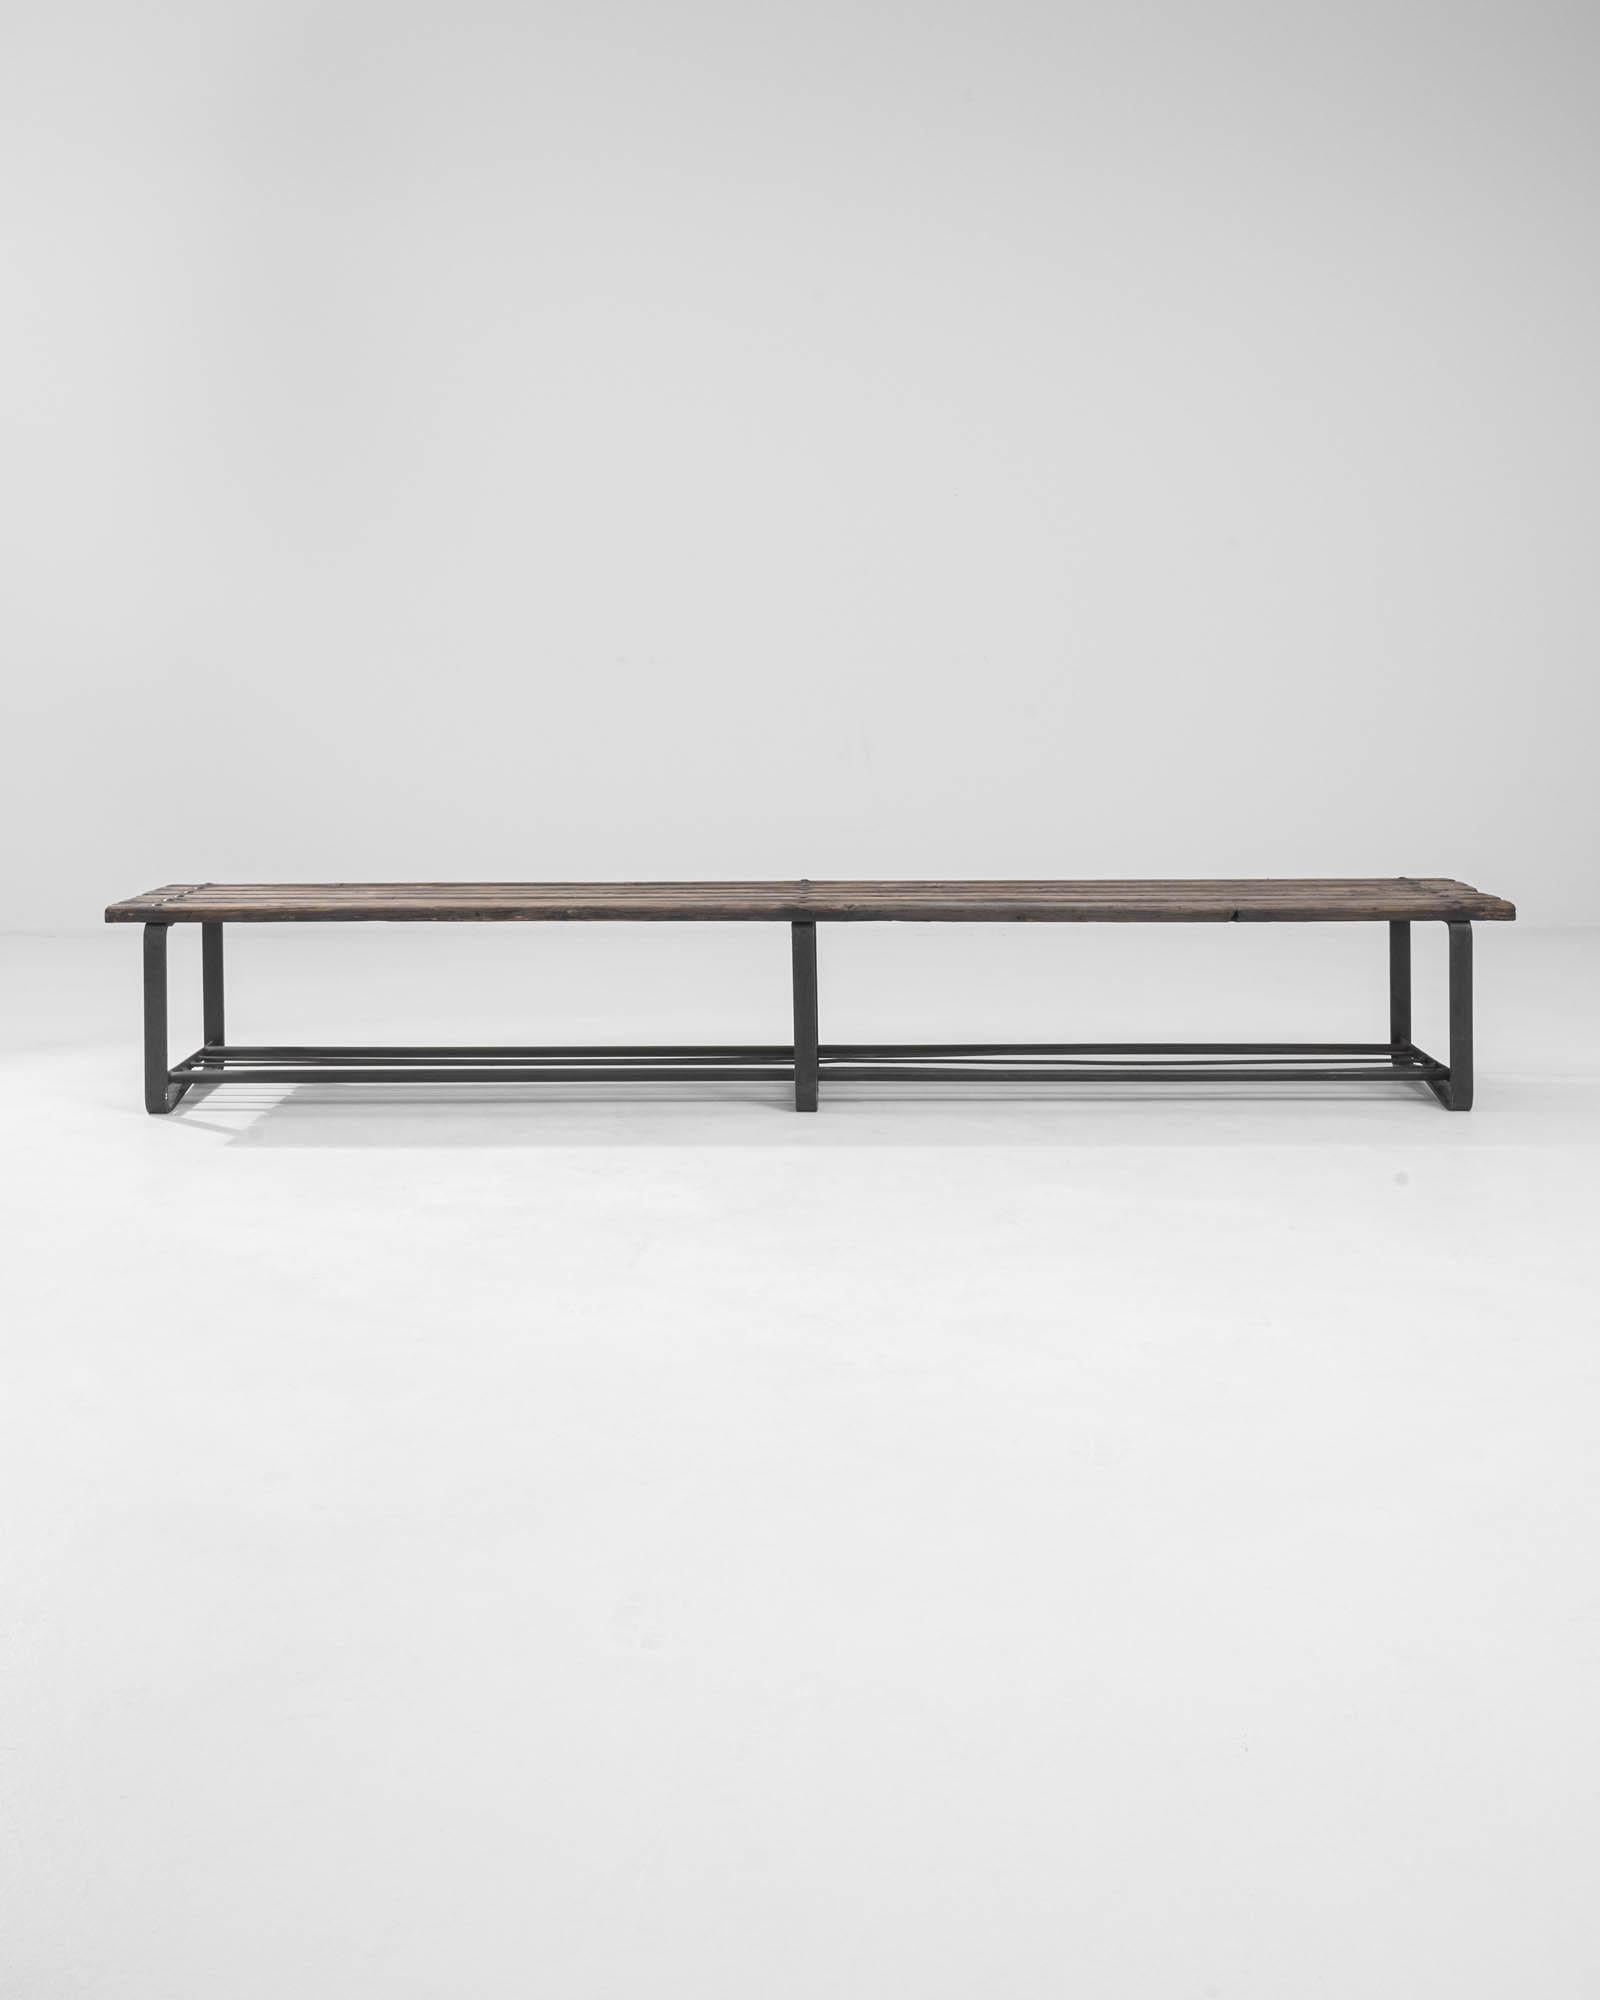 Czech 1950s Central European Industrial Steel Frame Bench For Sale